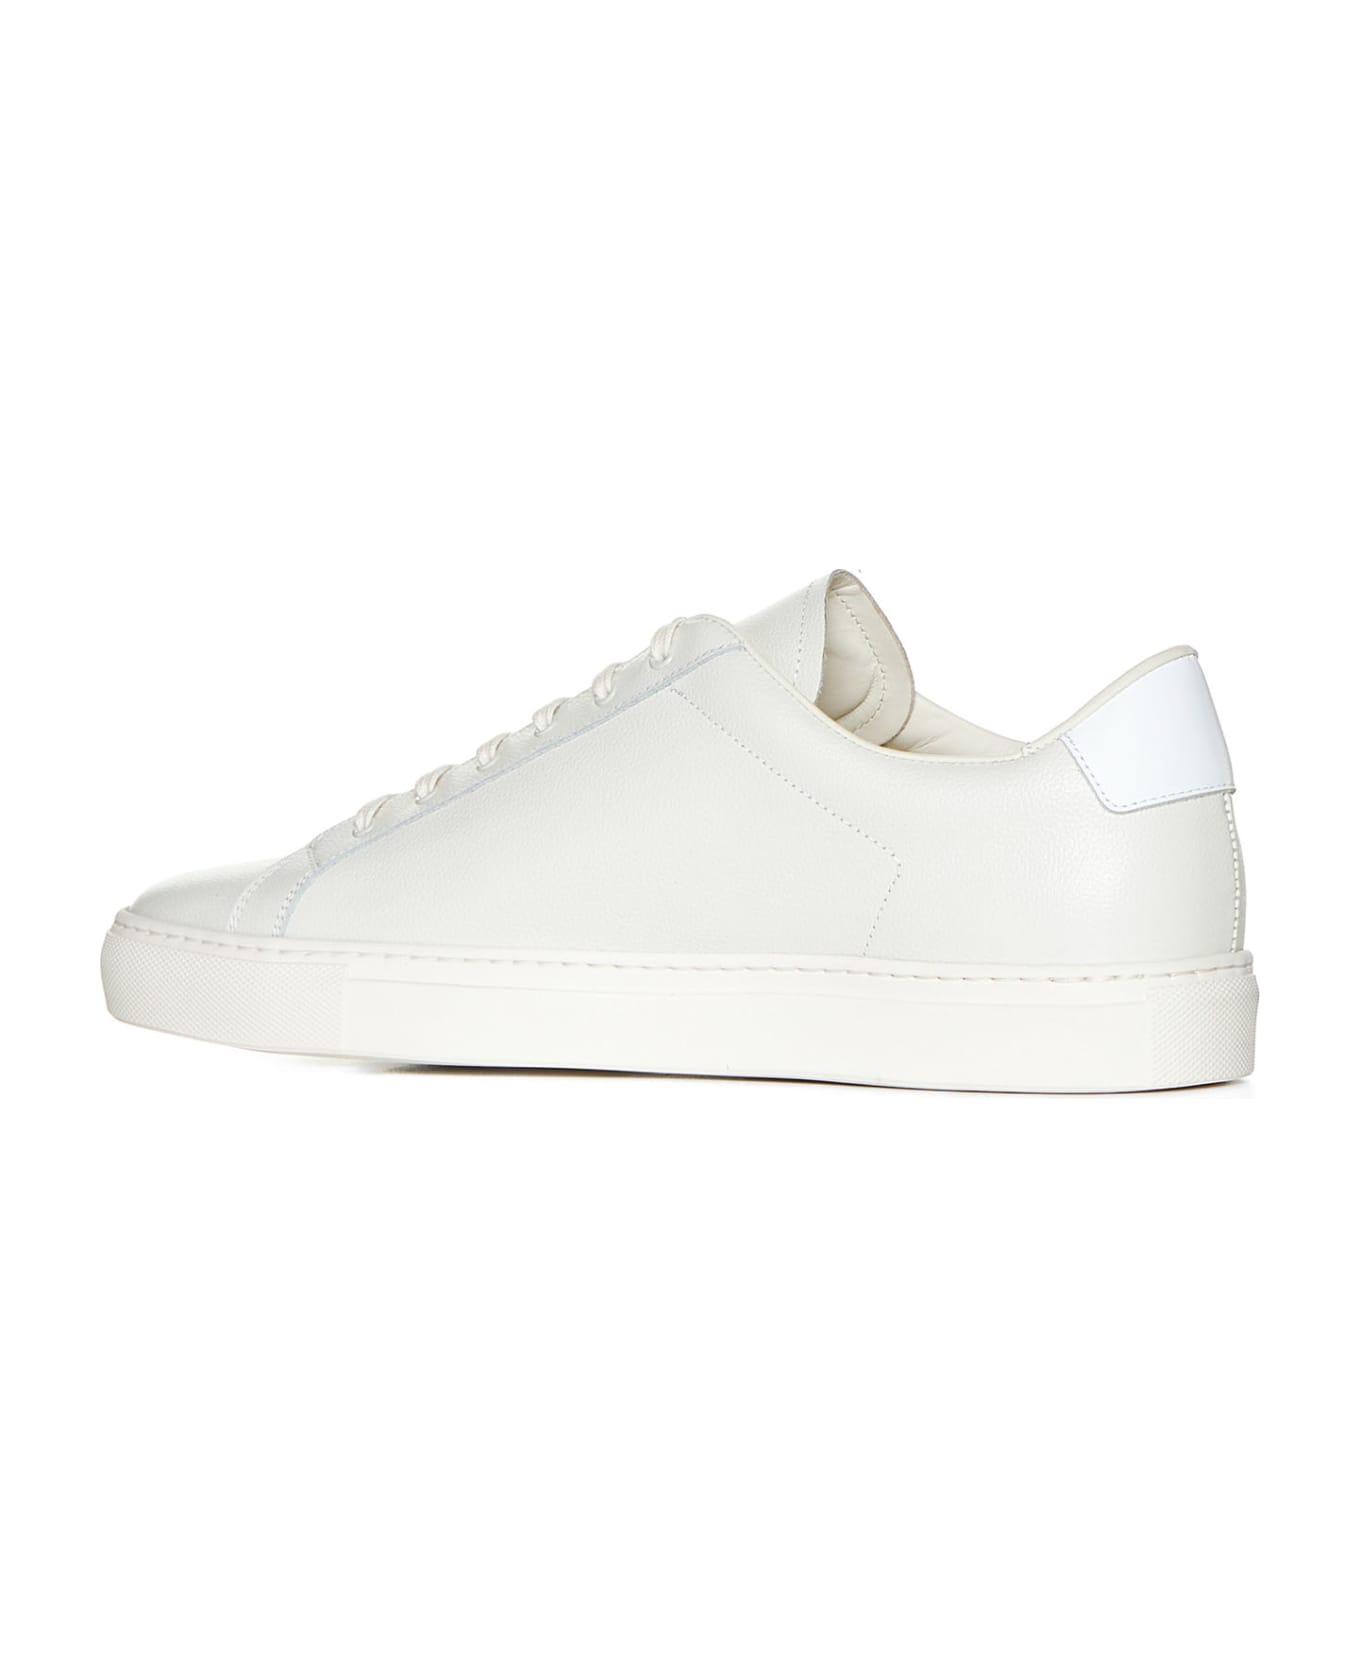 Common Projects Retro Bumpy Leather Sneakers - Vintage white スニーカー